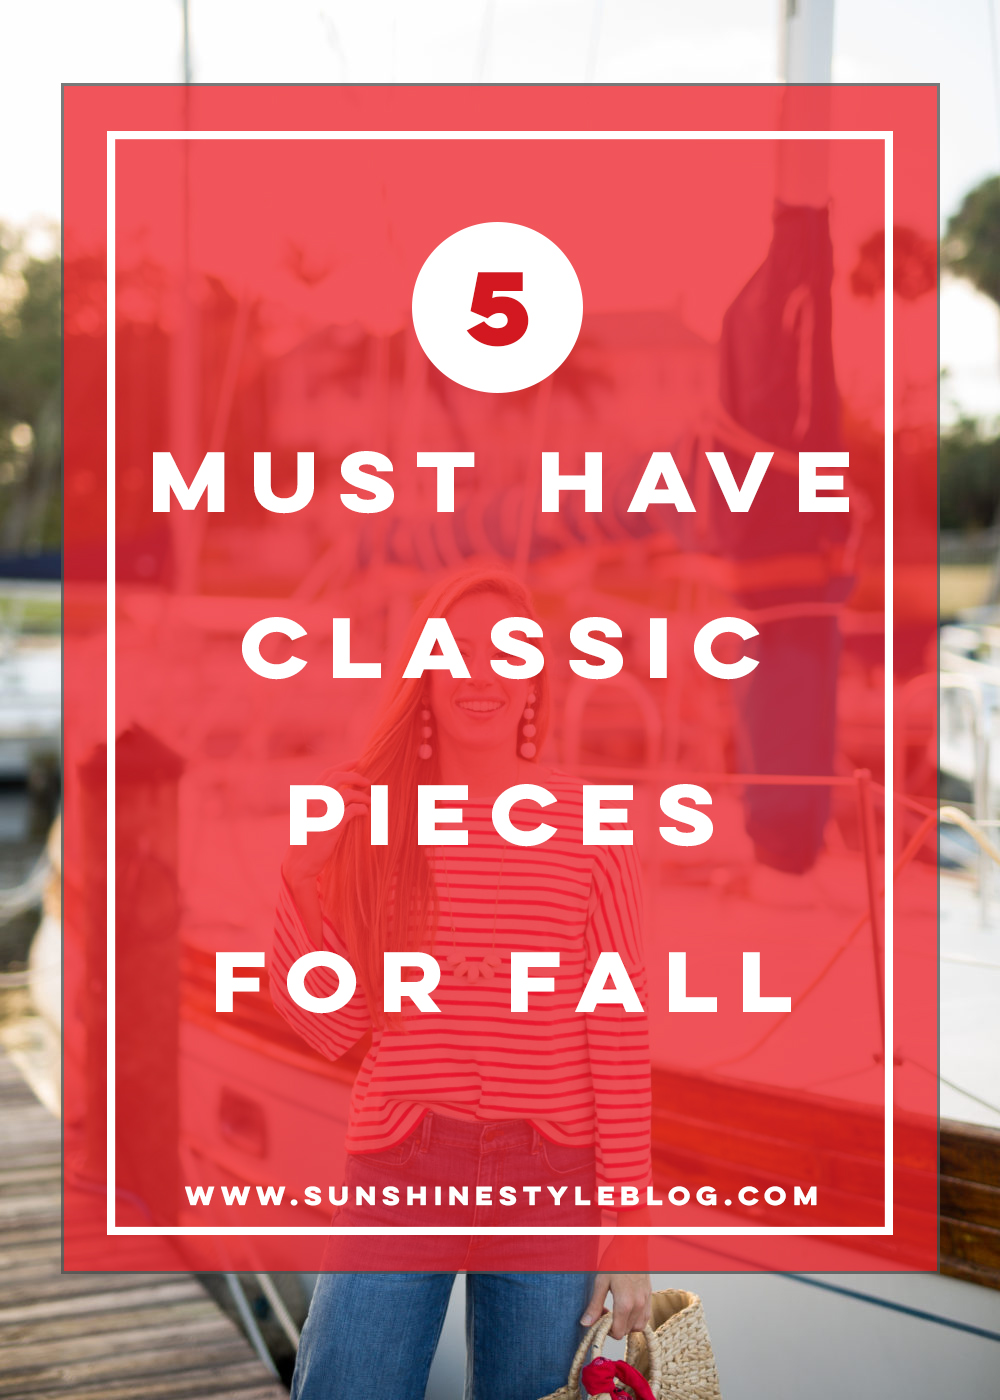 5 Must Have Classic Pieces for Fall - Classic Striped Fall Outfit, Includes striped top, wide leg pants, fall outfit inspiration | Sunshine Style